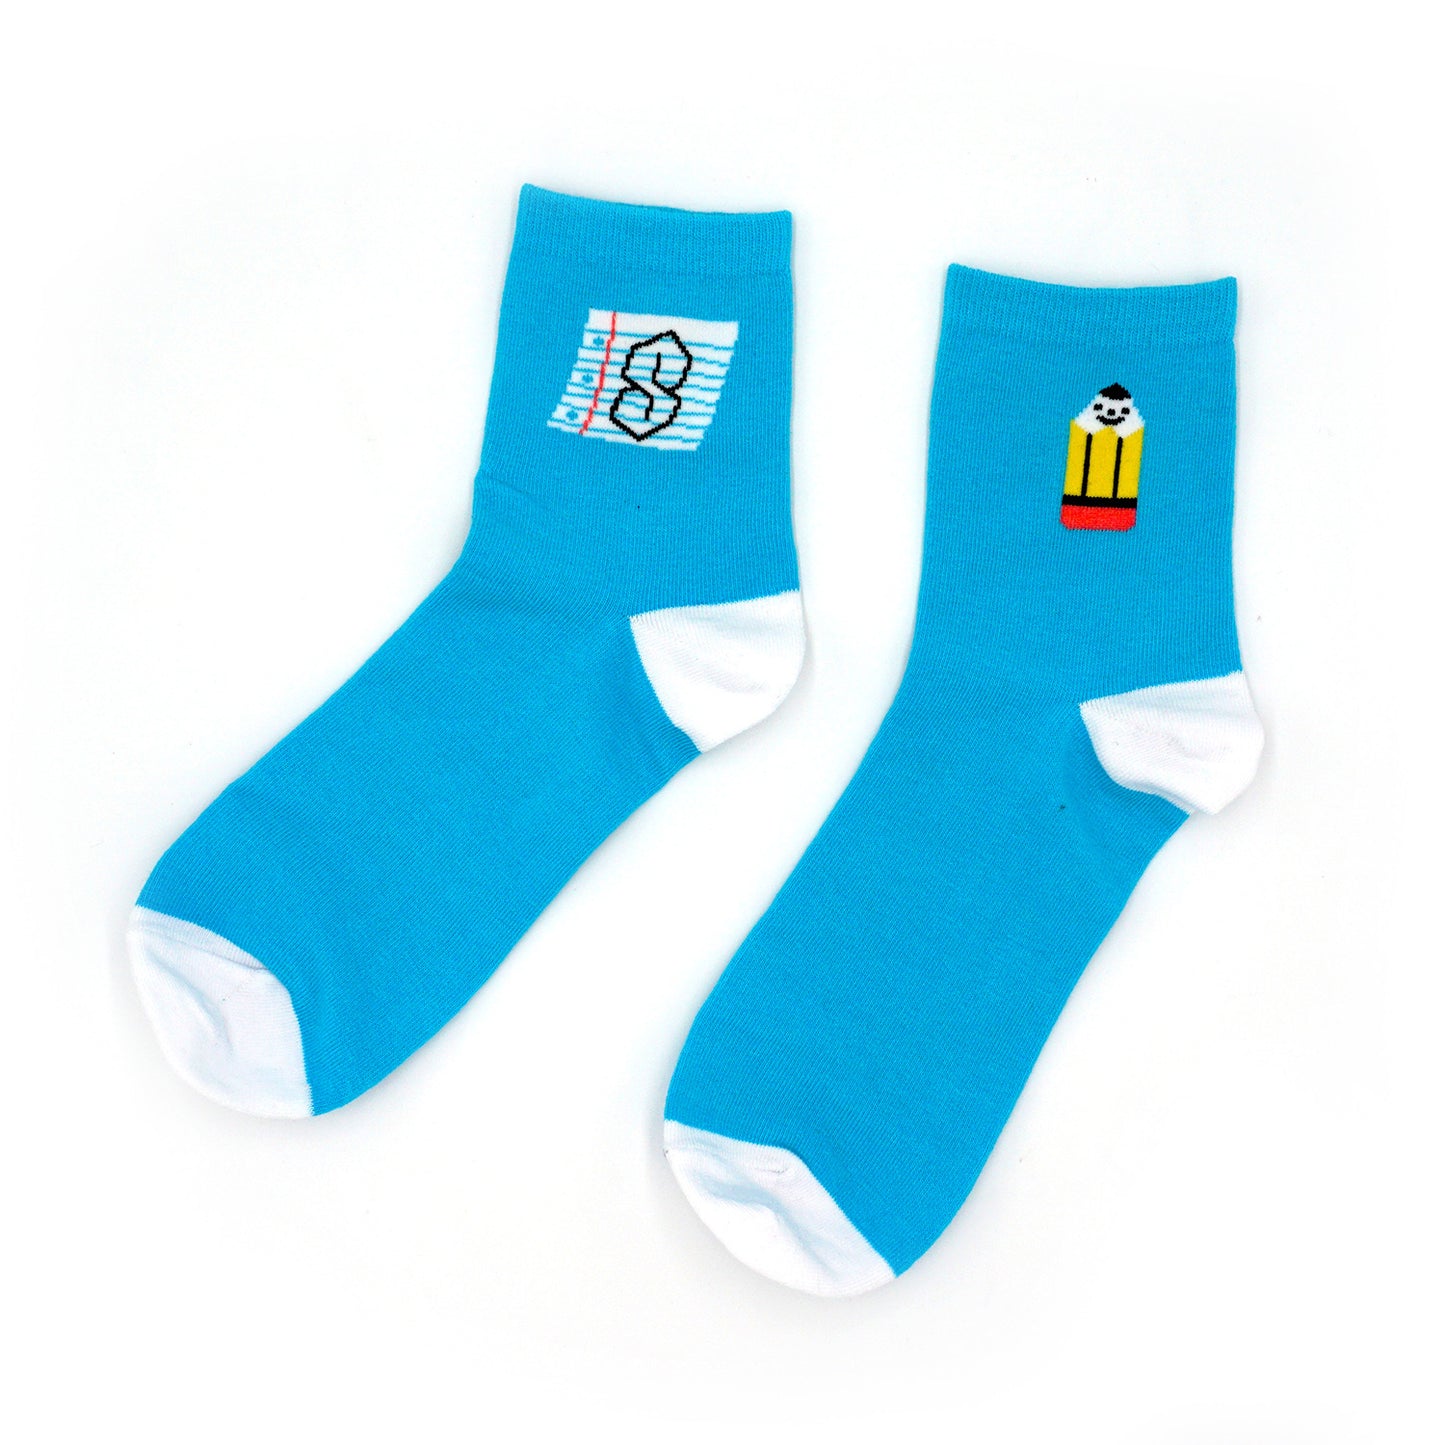 Paper and Pencil Socks